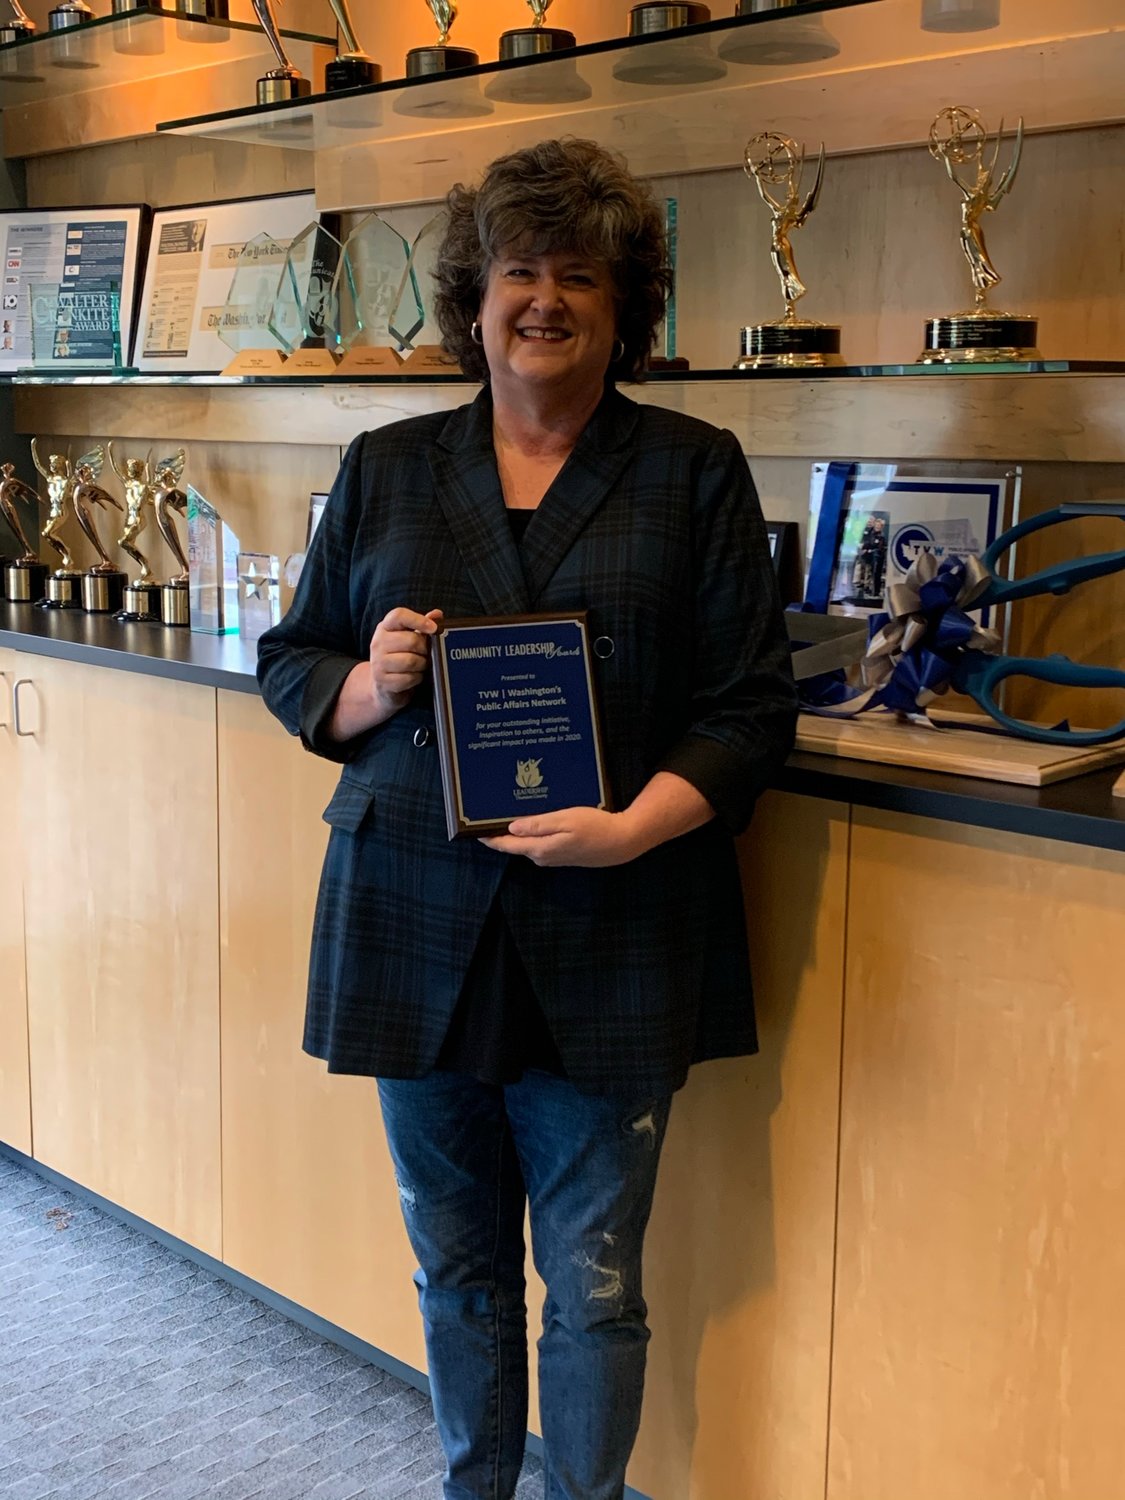 TVW received a 2020 Community Leadership Award from Leadership Thurston County (LTC) for the organization's part in the Thurston Strong initiative.